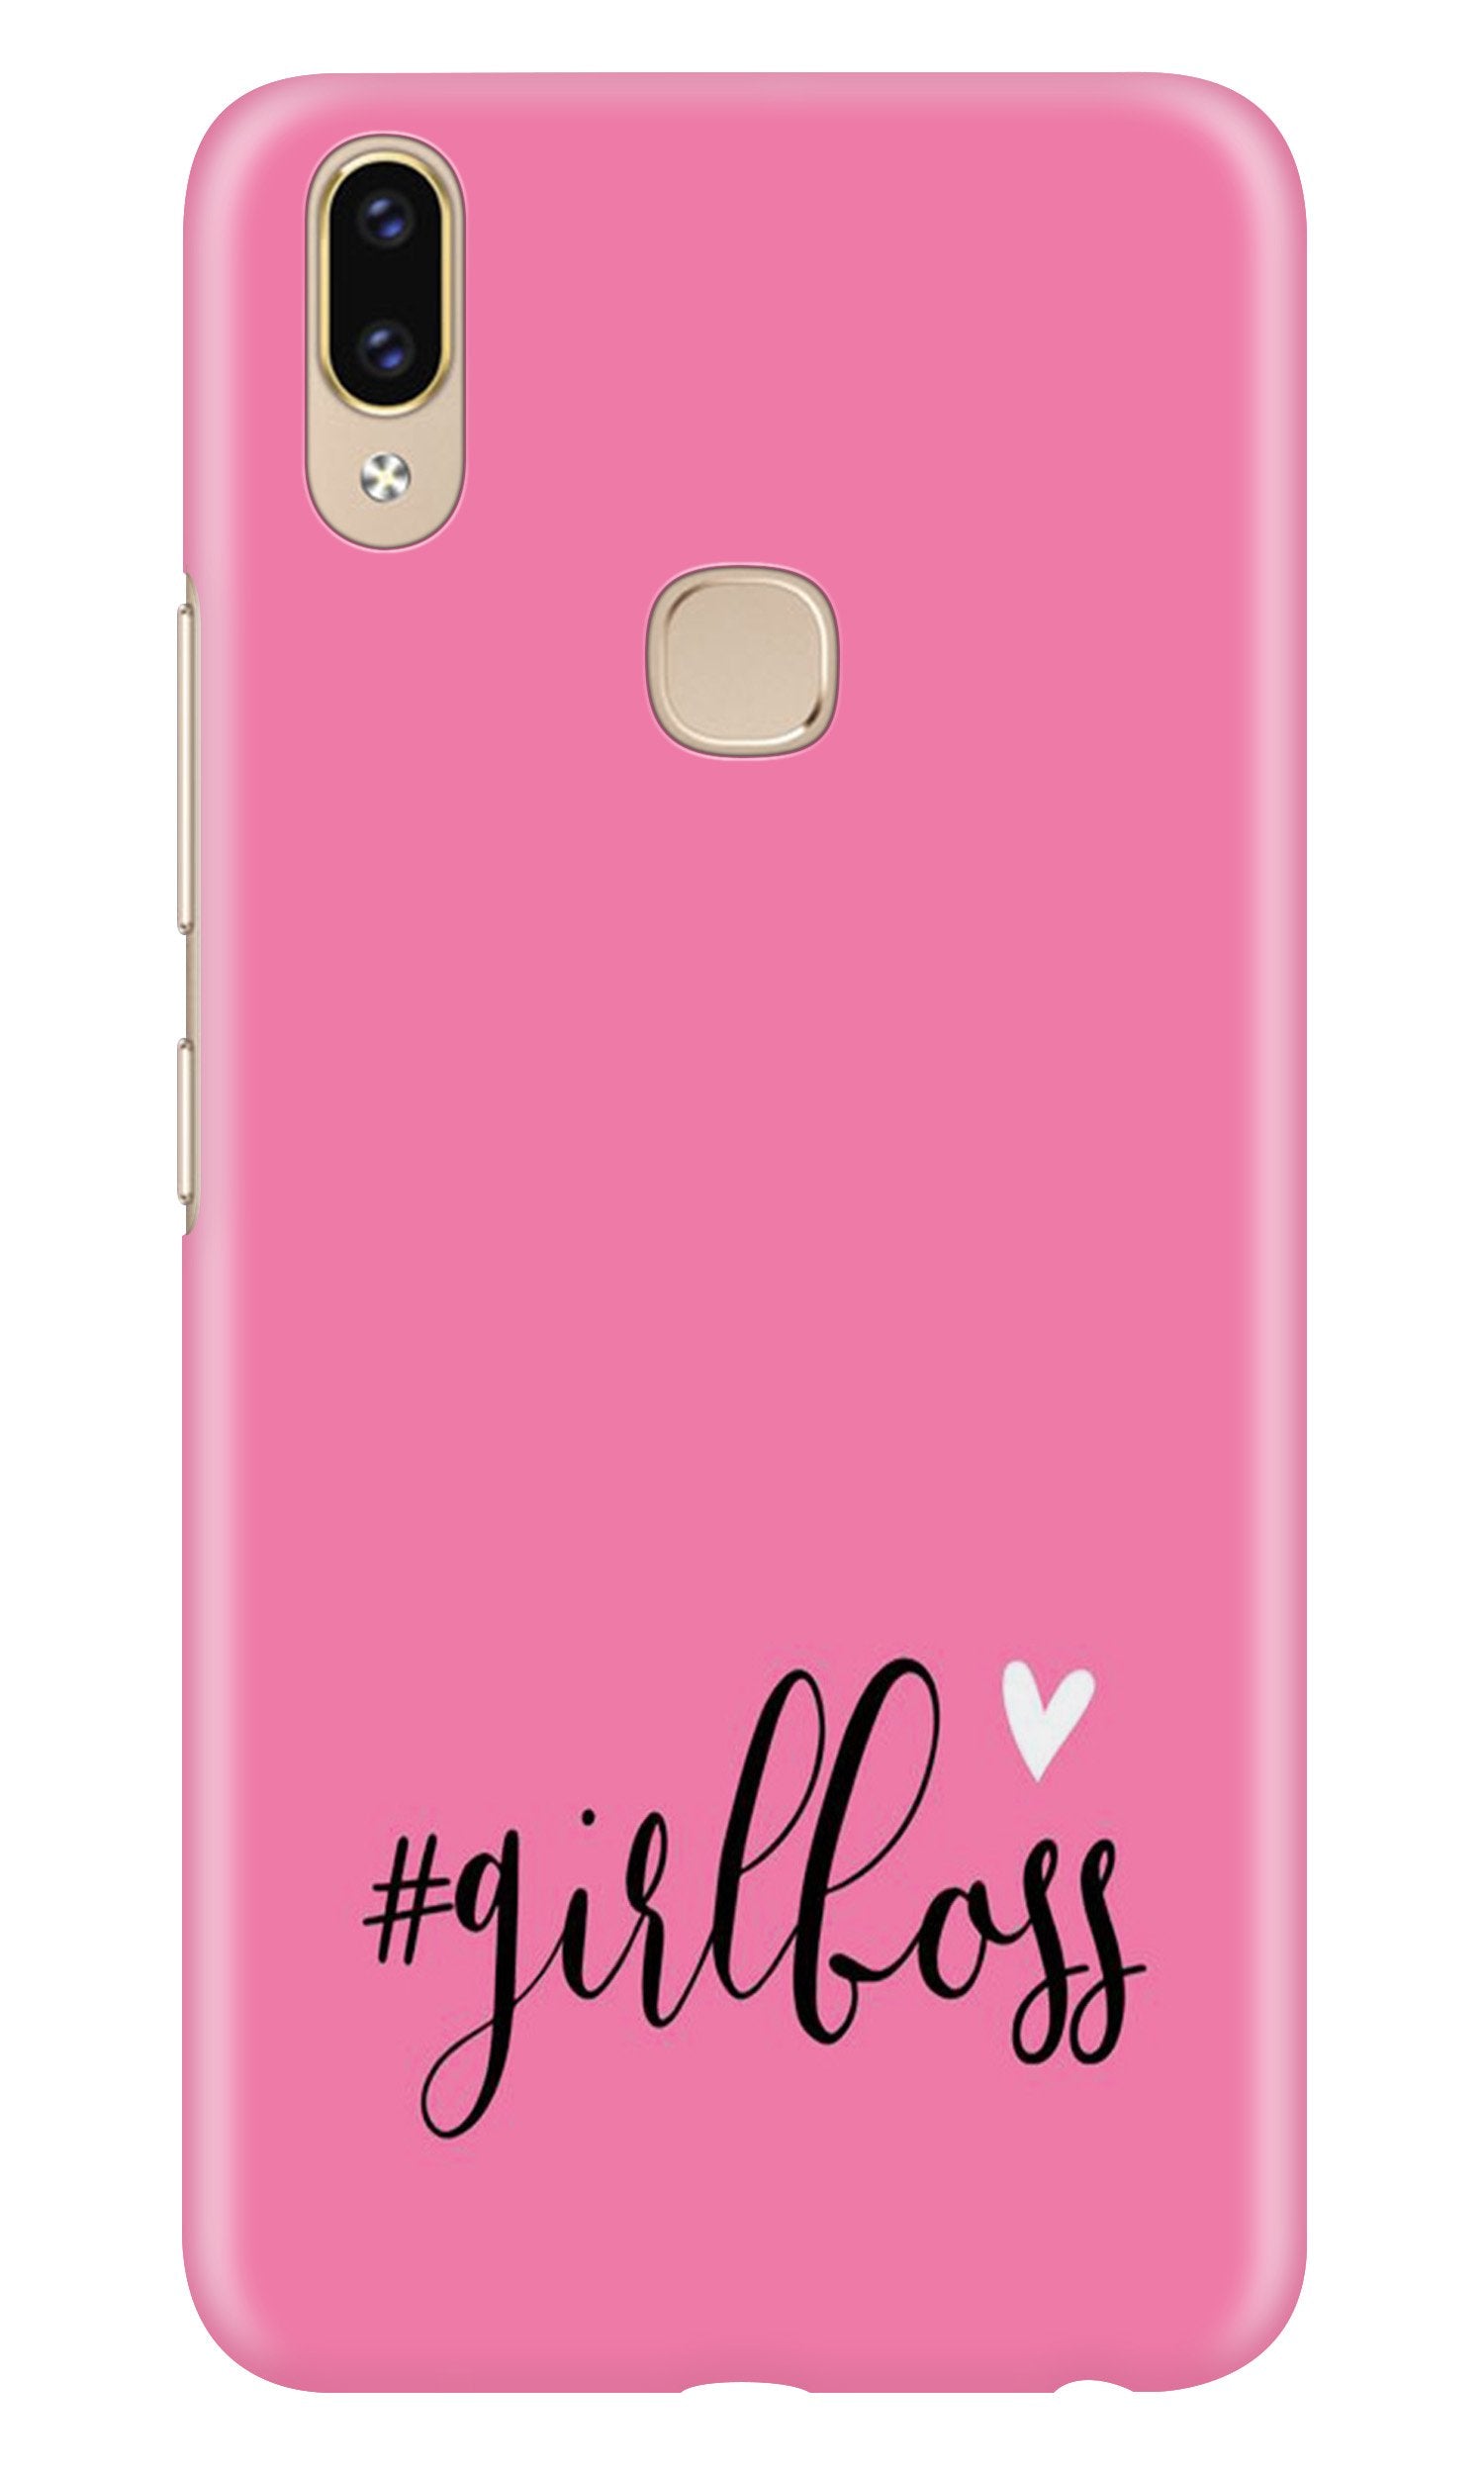 Girl Boss Pink Case for Asus Zenfone Max Pro M2 (Design No. 269)